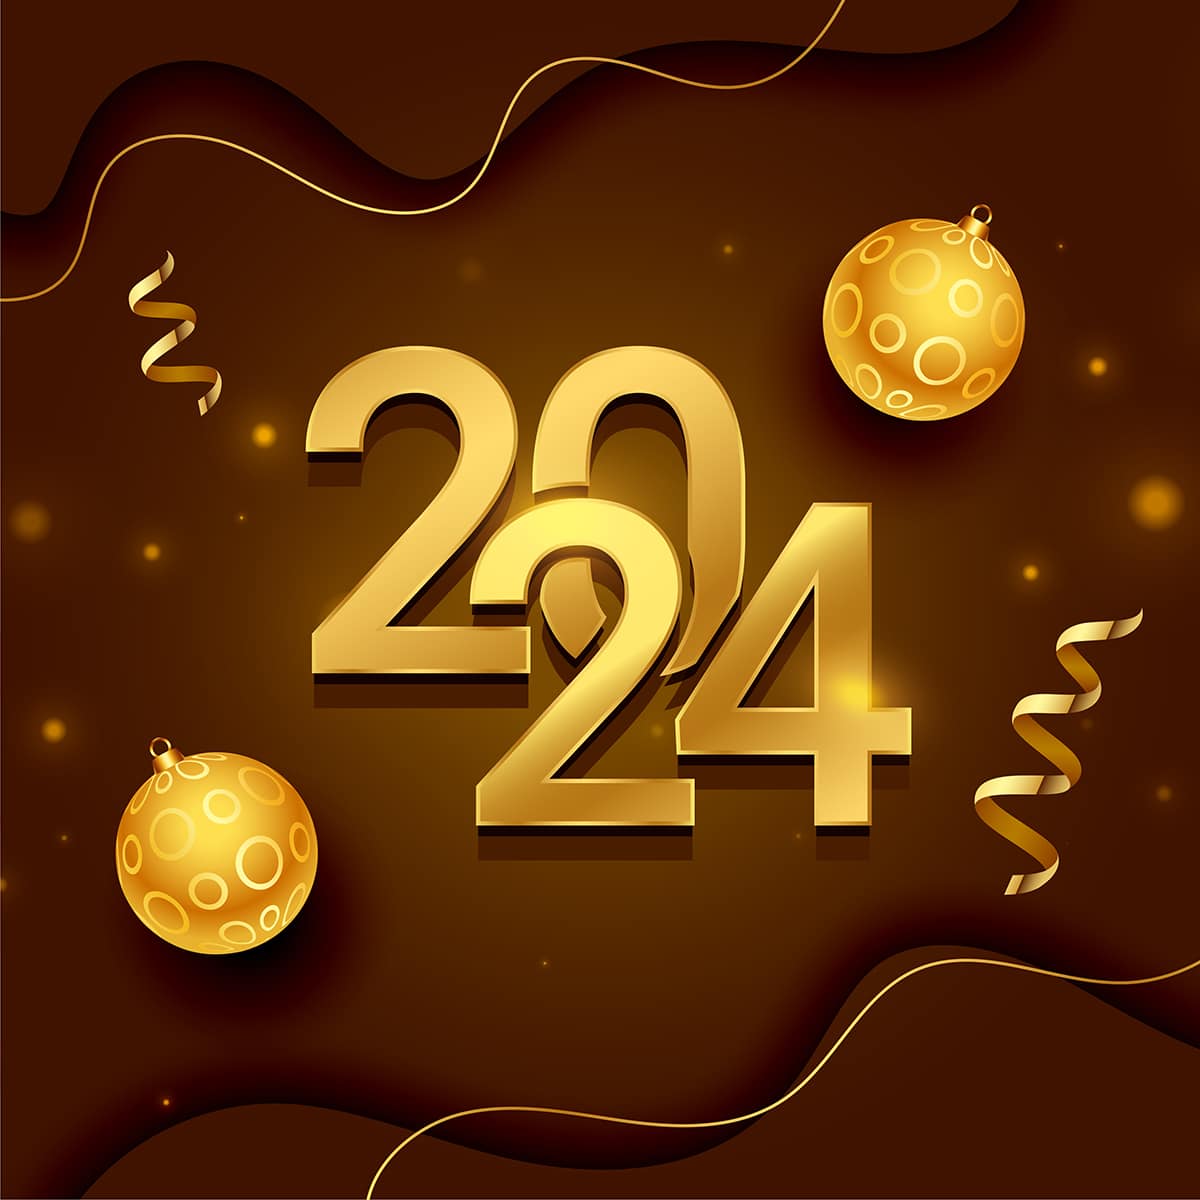  Happy new year 2024 wishes in english, Happy New Year 2023 wishes text, Happy New Year 2024 wishes in english